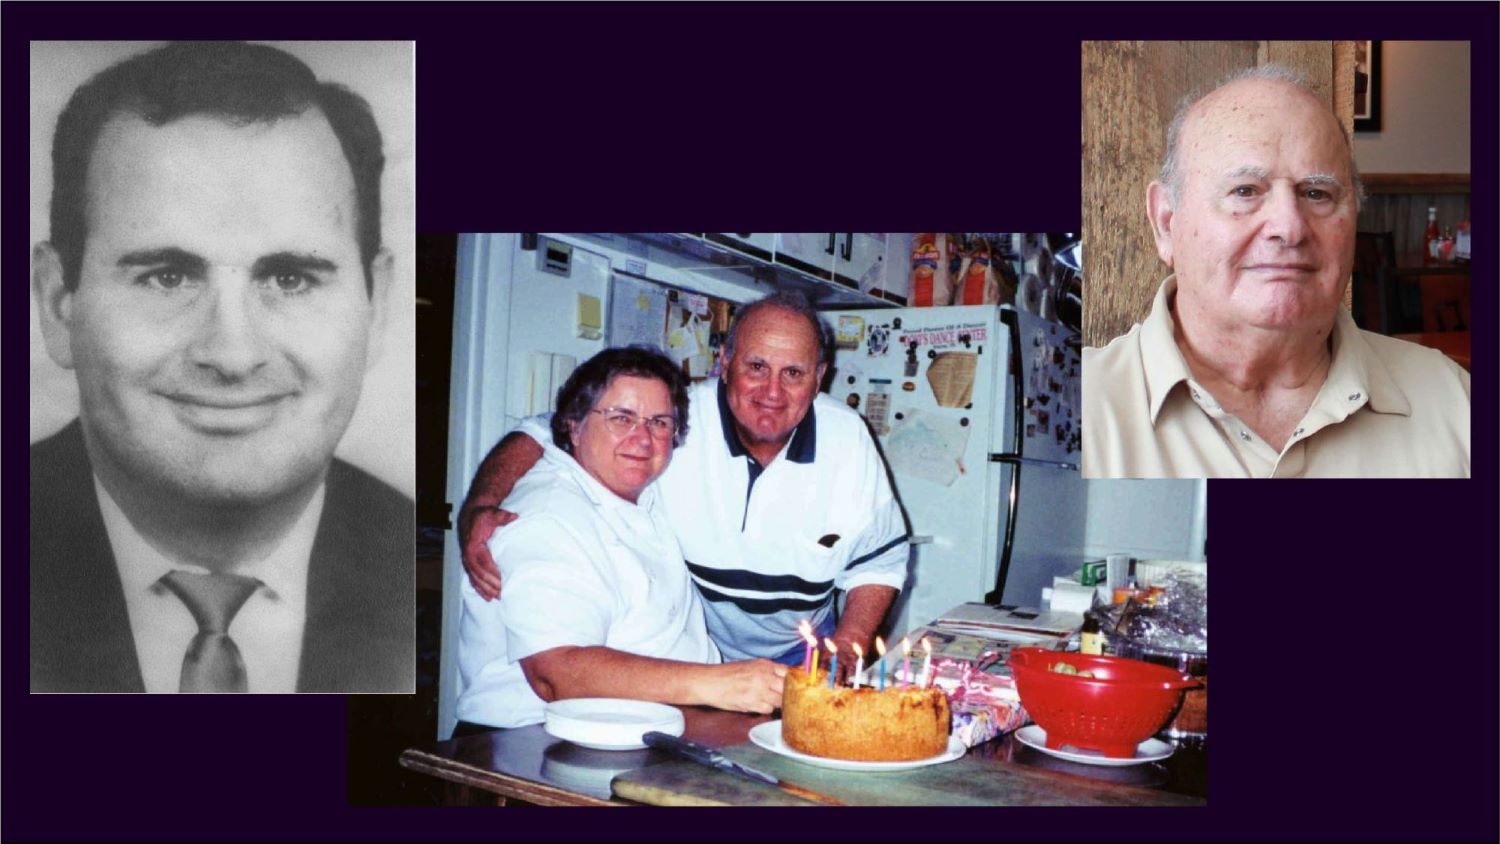  A portrait of Carl Ventrice from the 60s, a snapshot of Marie and Carl with a birthday cake, a portrait of Carl Ventrice from the 2000's